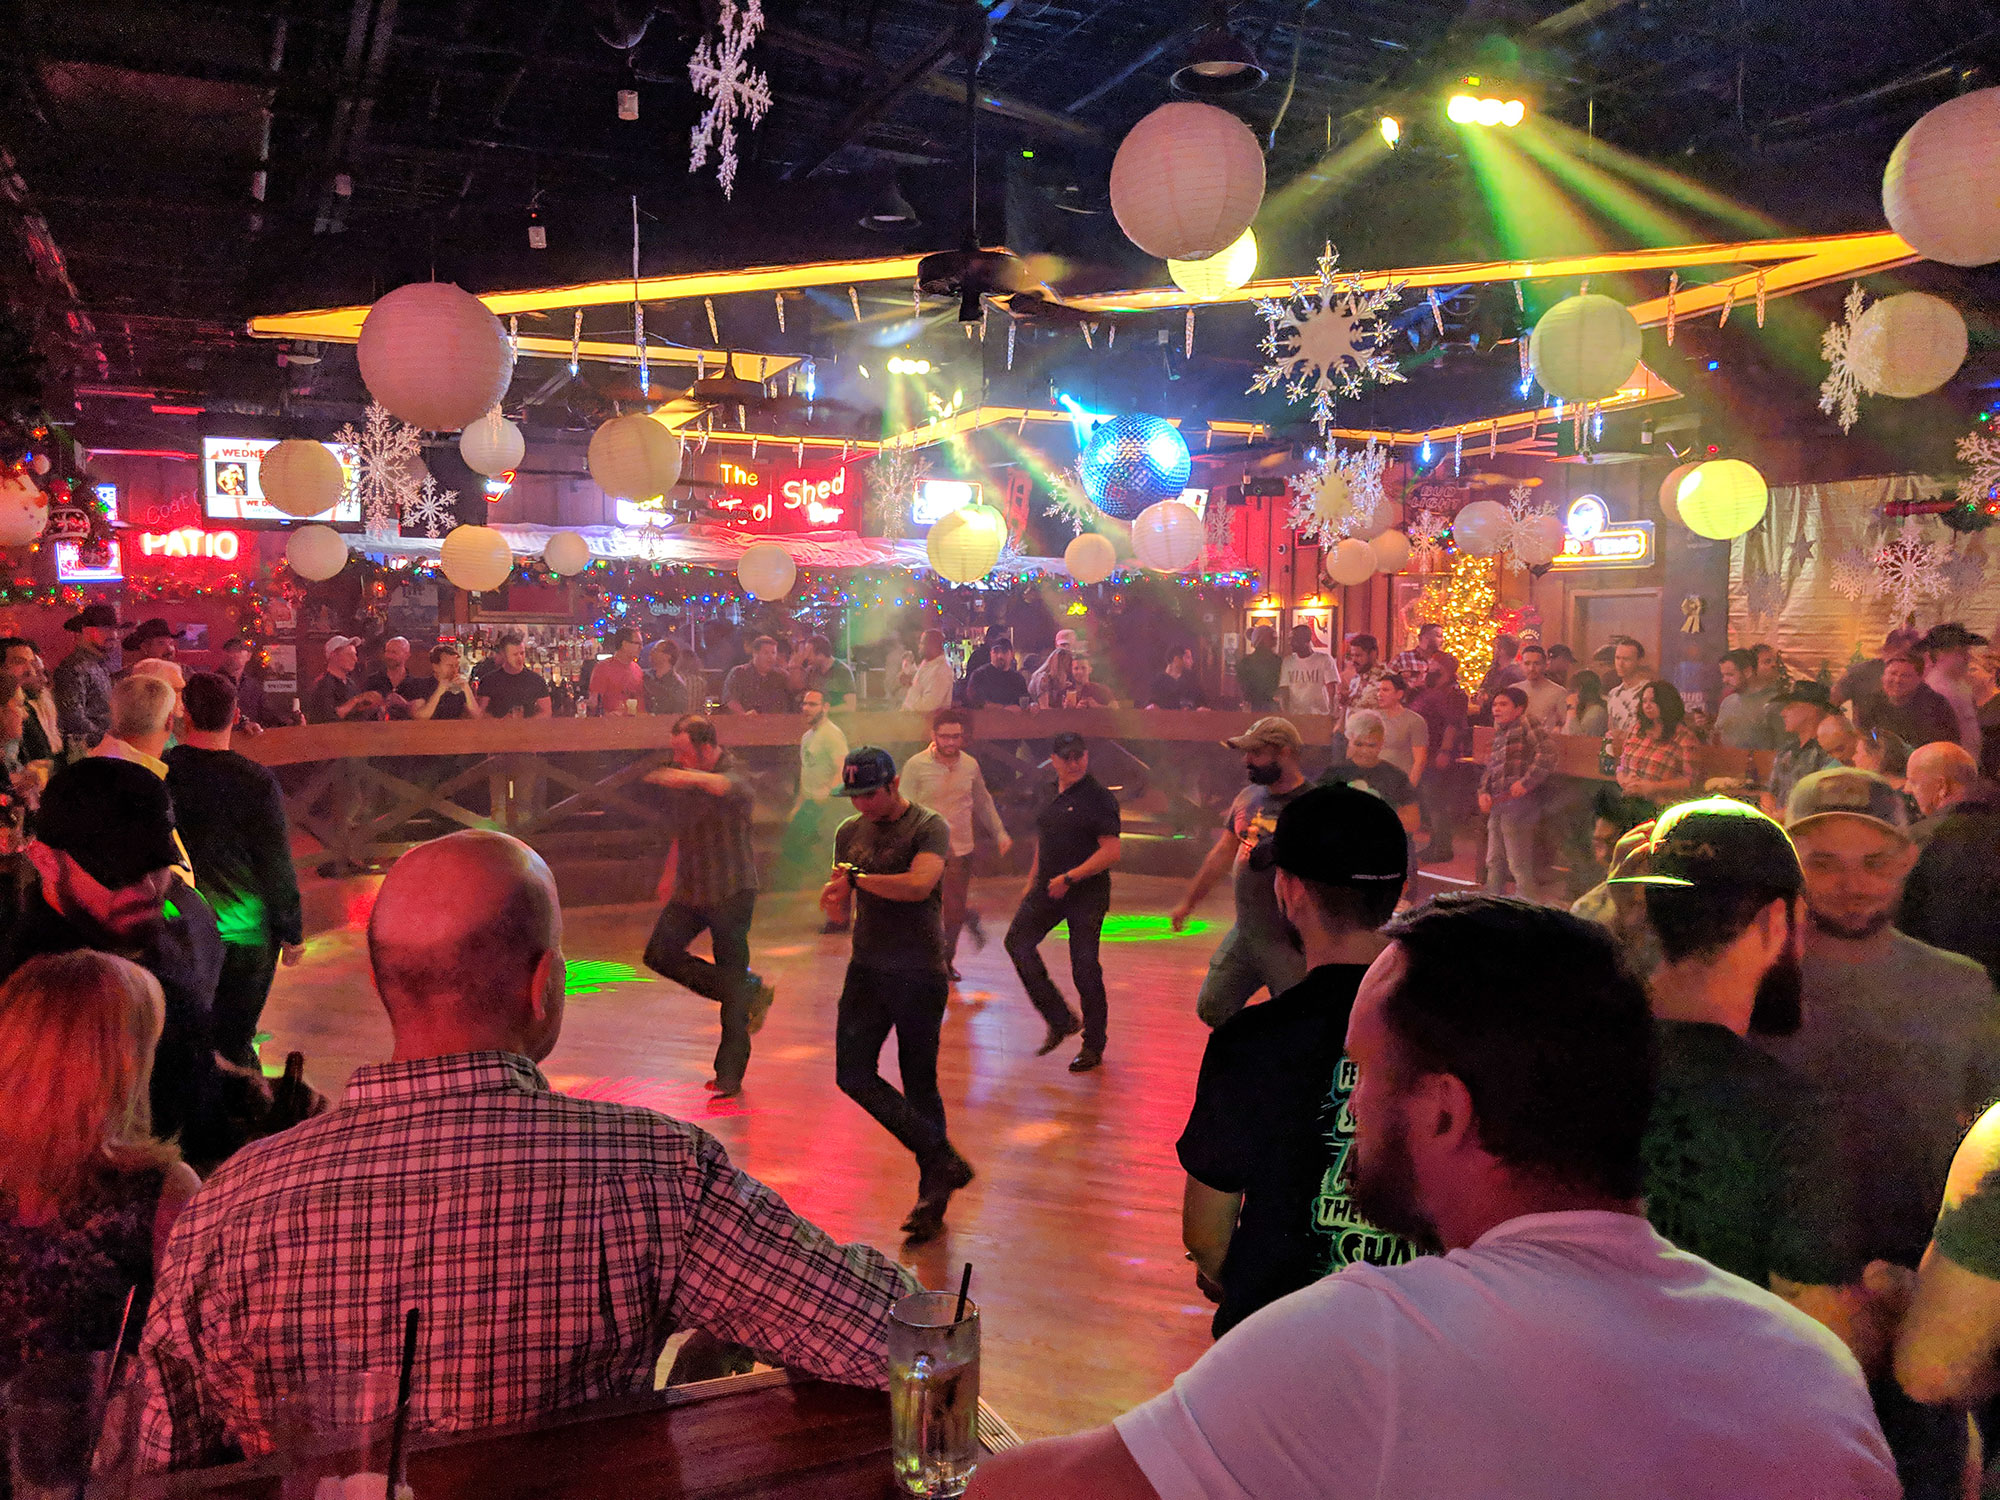 Line dancing at the Roundup Saloon in Oak Lawn.